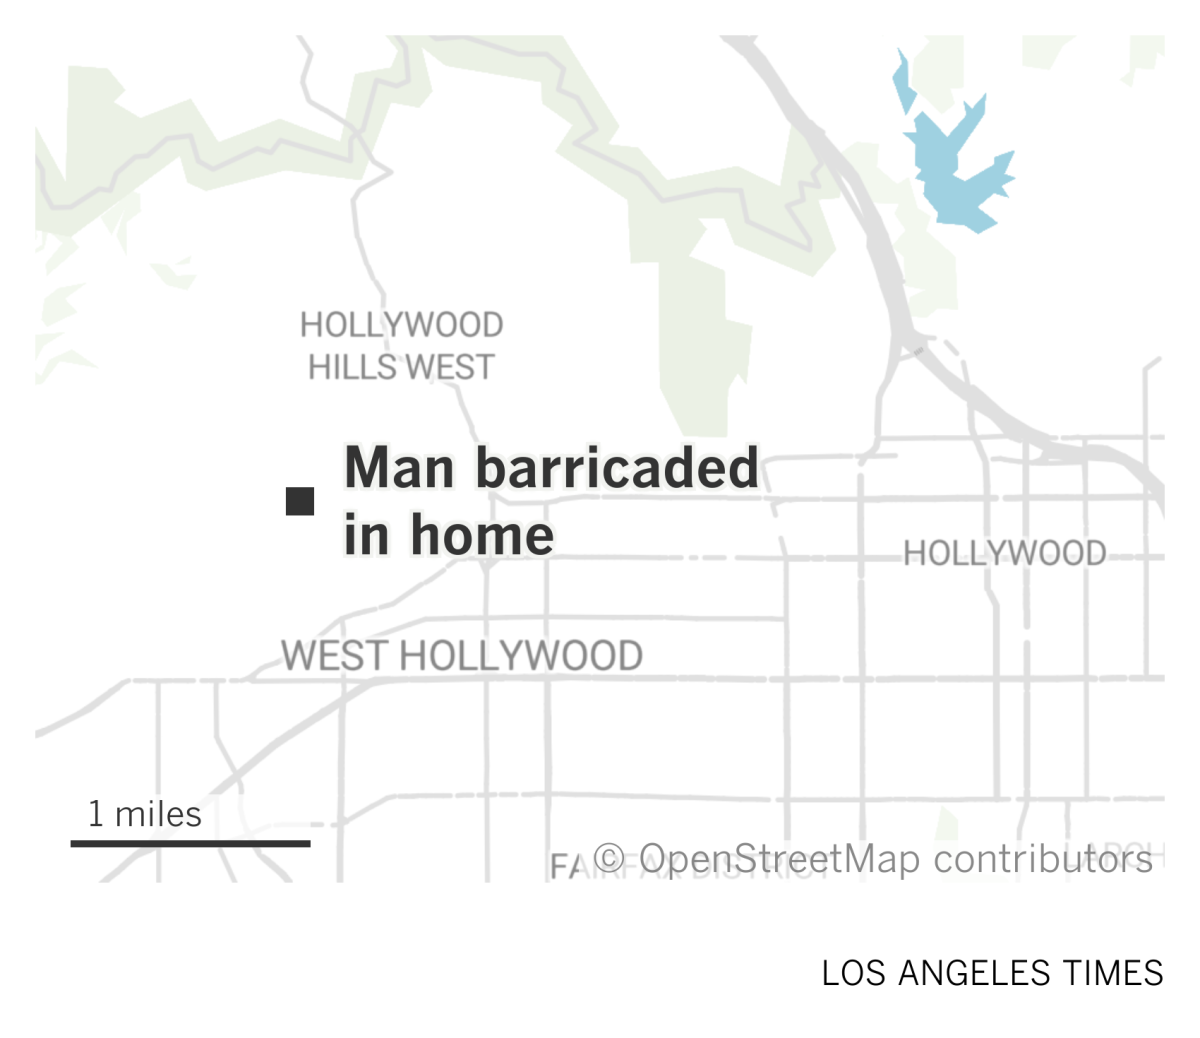 A map of central L.A. showing where a man barricaded himself inside a home in Hollywood Hills West